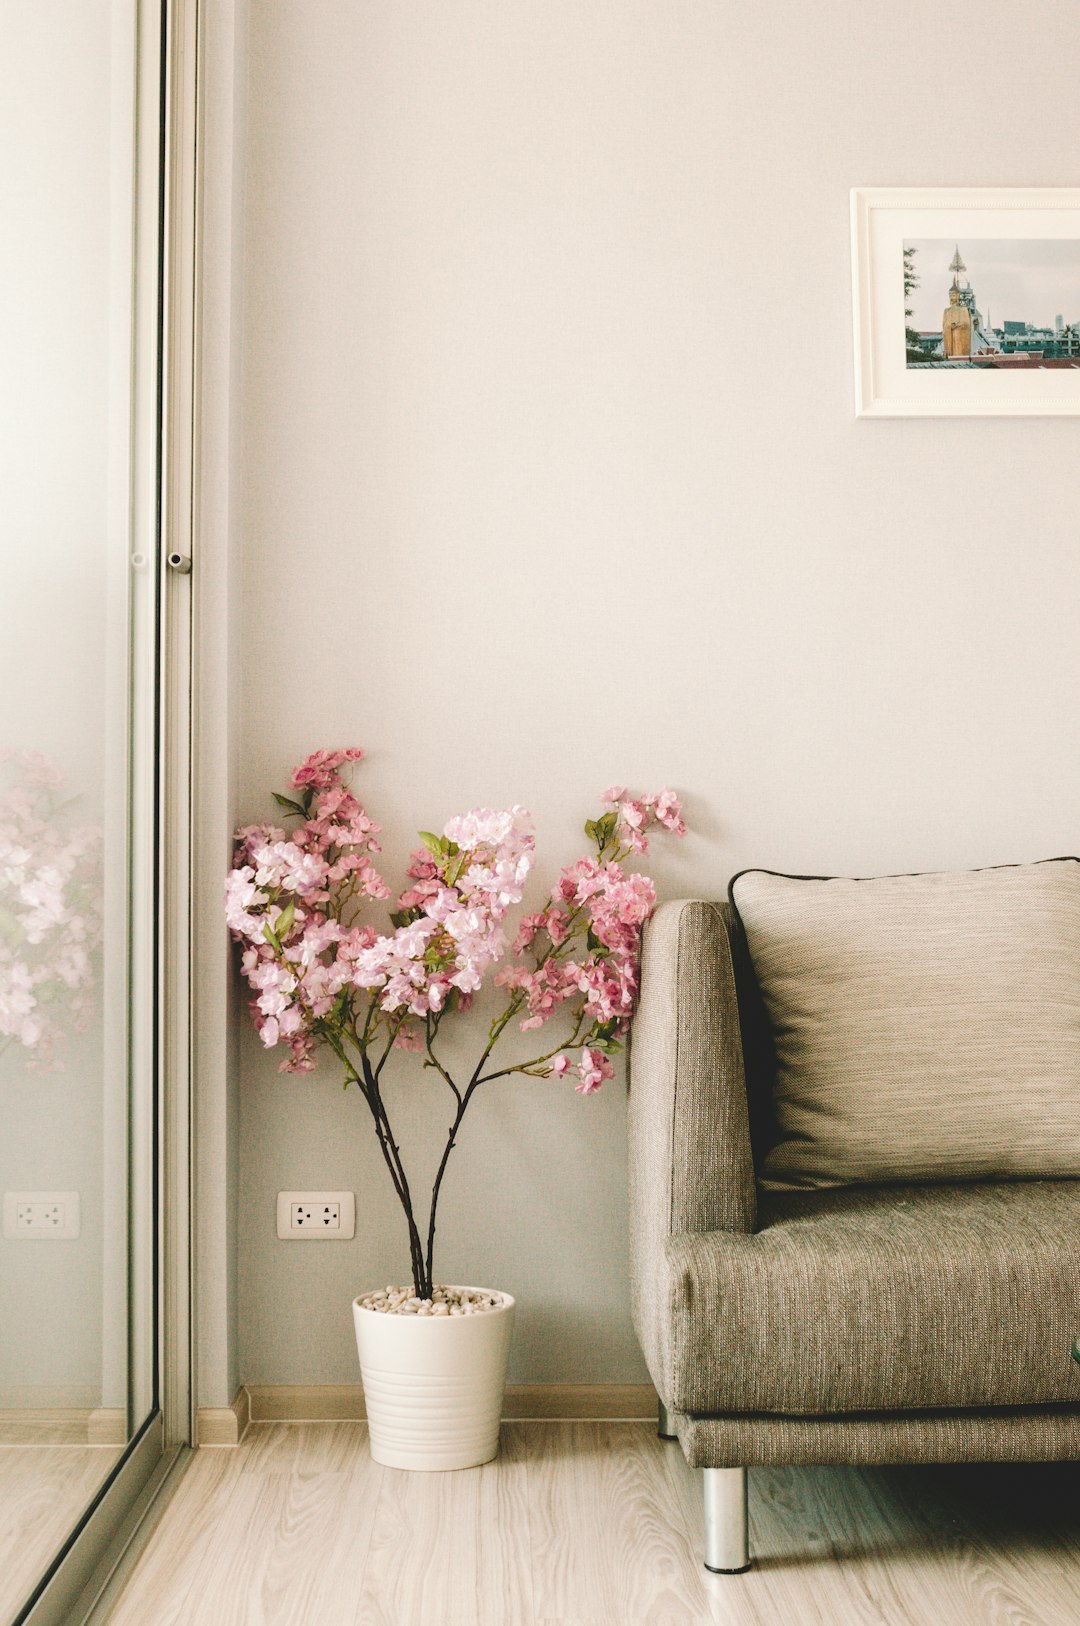 A small pink flower tree in the corner of an empty living room, with a sofa and floor-to-ceiling window behind it, against light gray walls, in the style of a photo with a warm tone.